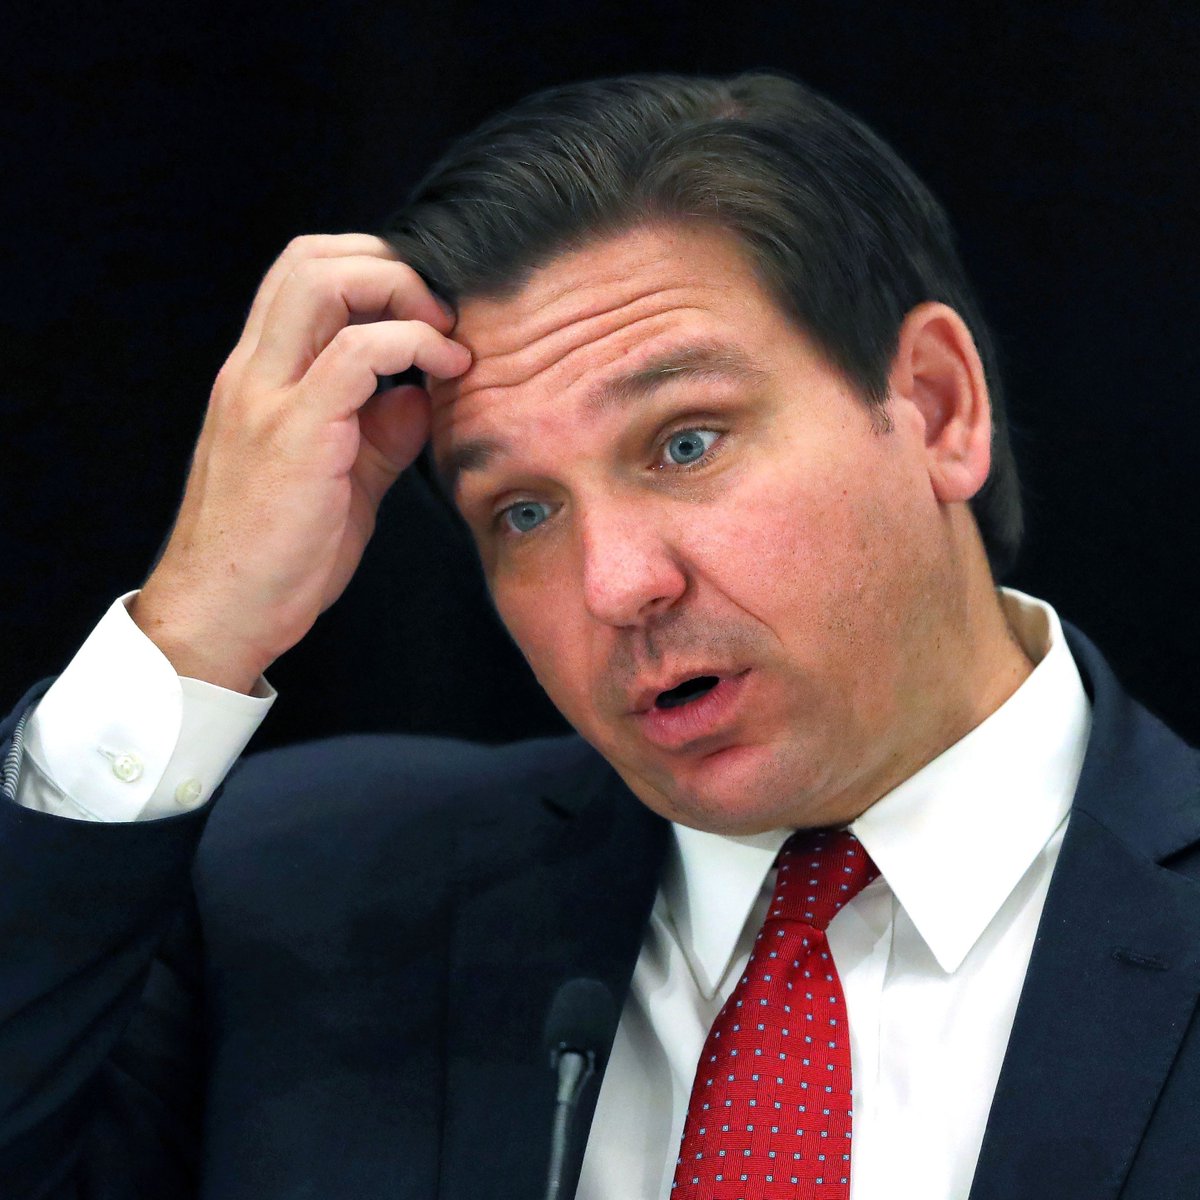 BLAME DESANTIS: A massive exodus from the Sunshine State has thousands of undocumented farm workers fleeing to other states as farmers and other employers are FURIOUS with Governor DeSantis' short-sighted immigration legislation.

Florida Governor Ron DeSantis signed into law a…